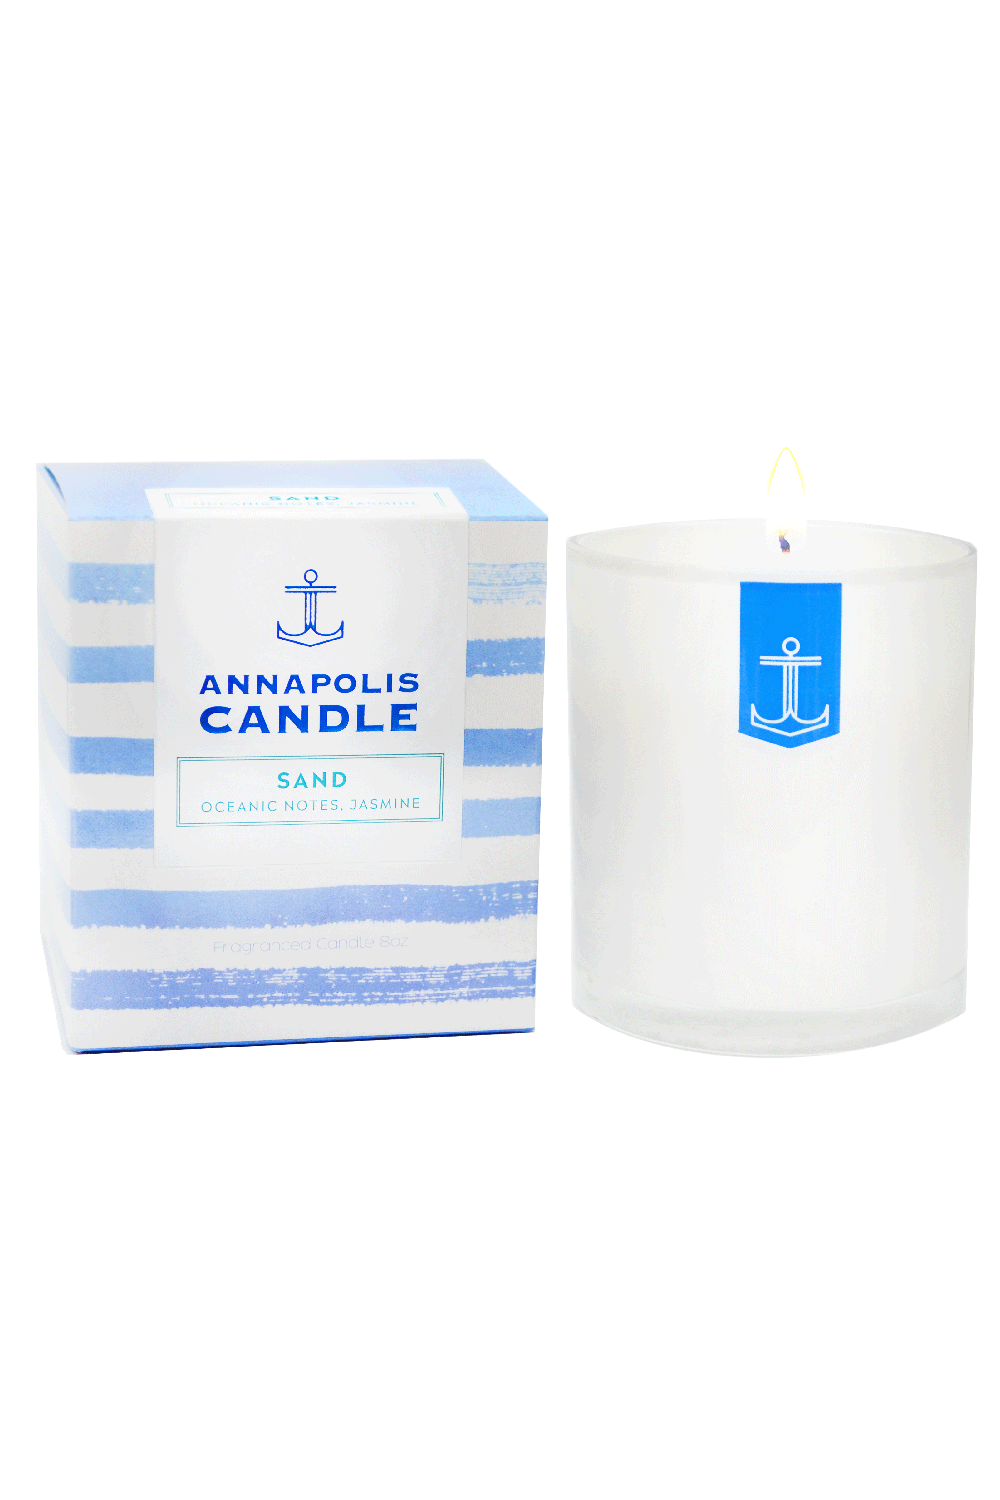 Boxed Annapolis Candle - Sand